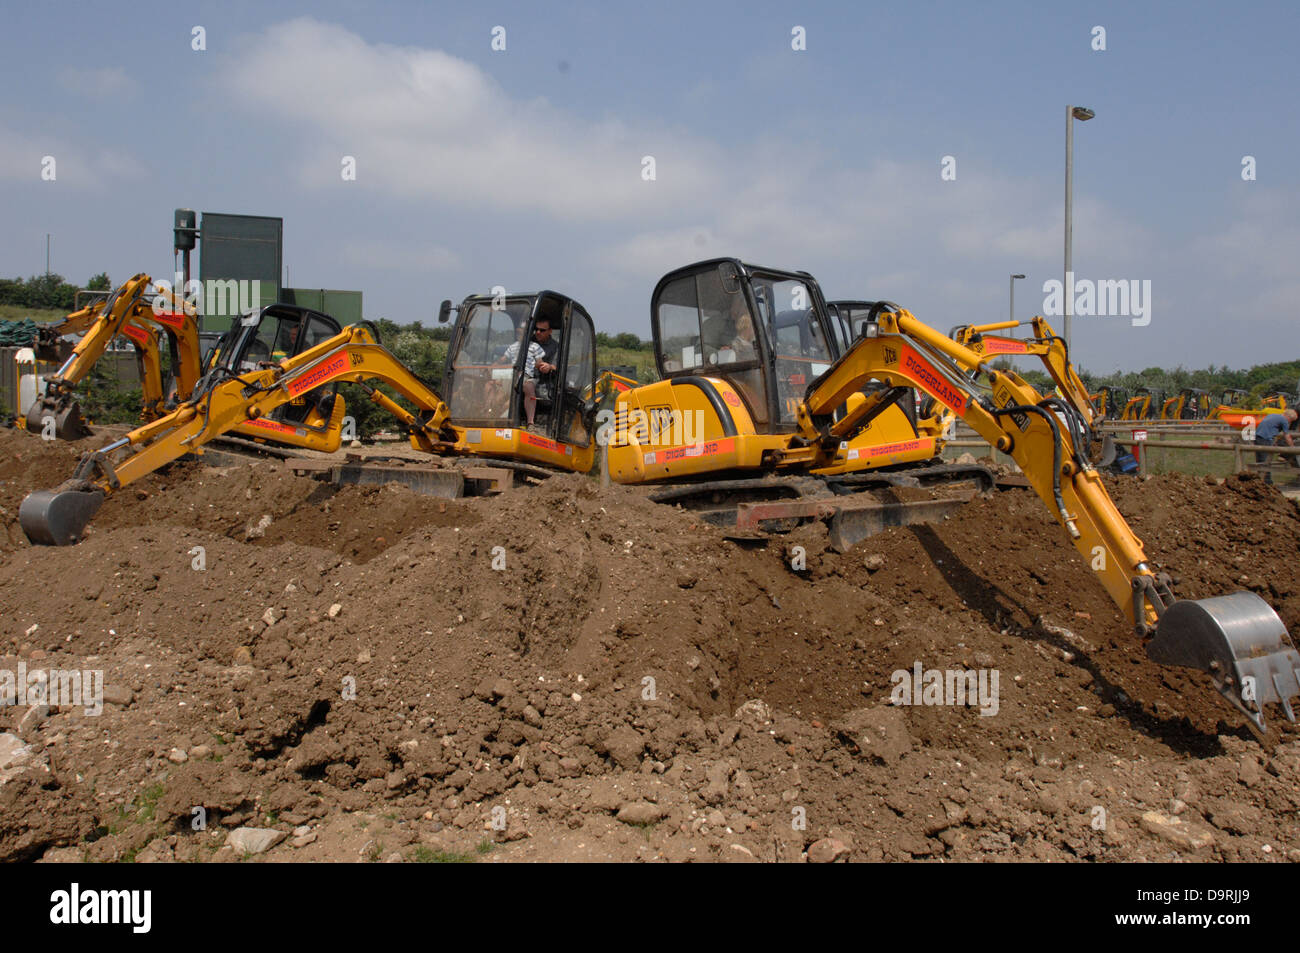 JCB racing e acrobazie in Diggerland Strood Kent Foto Stock